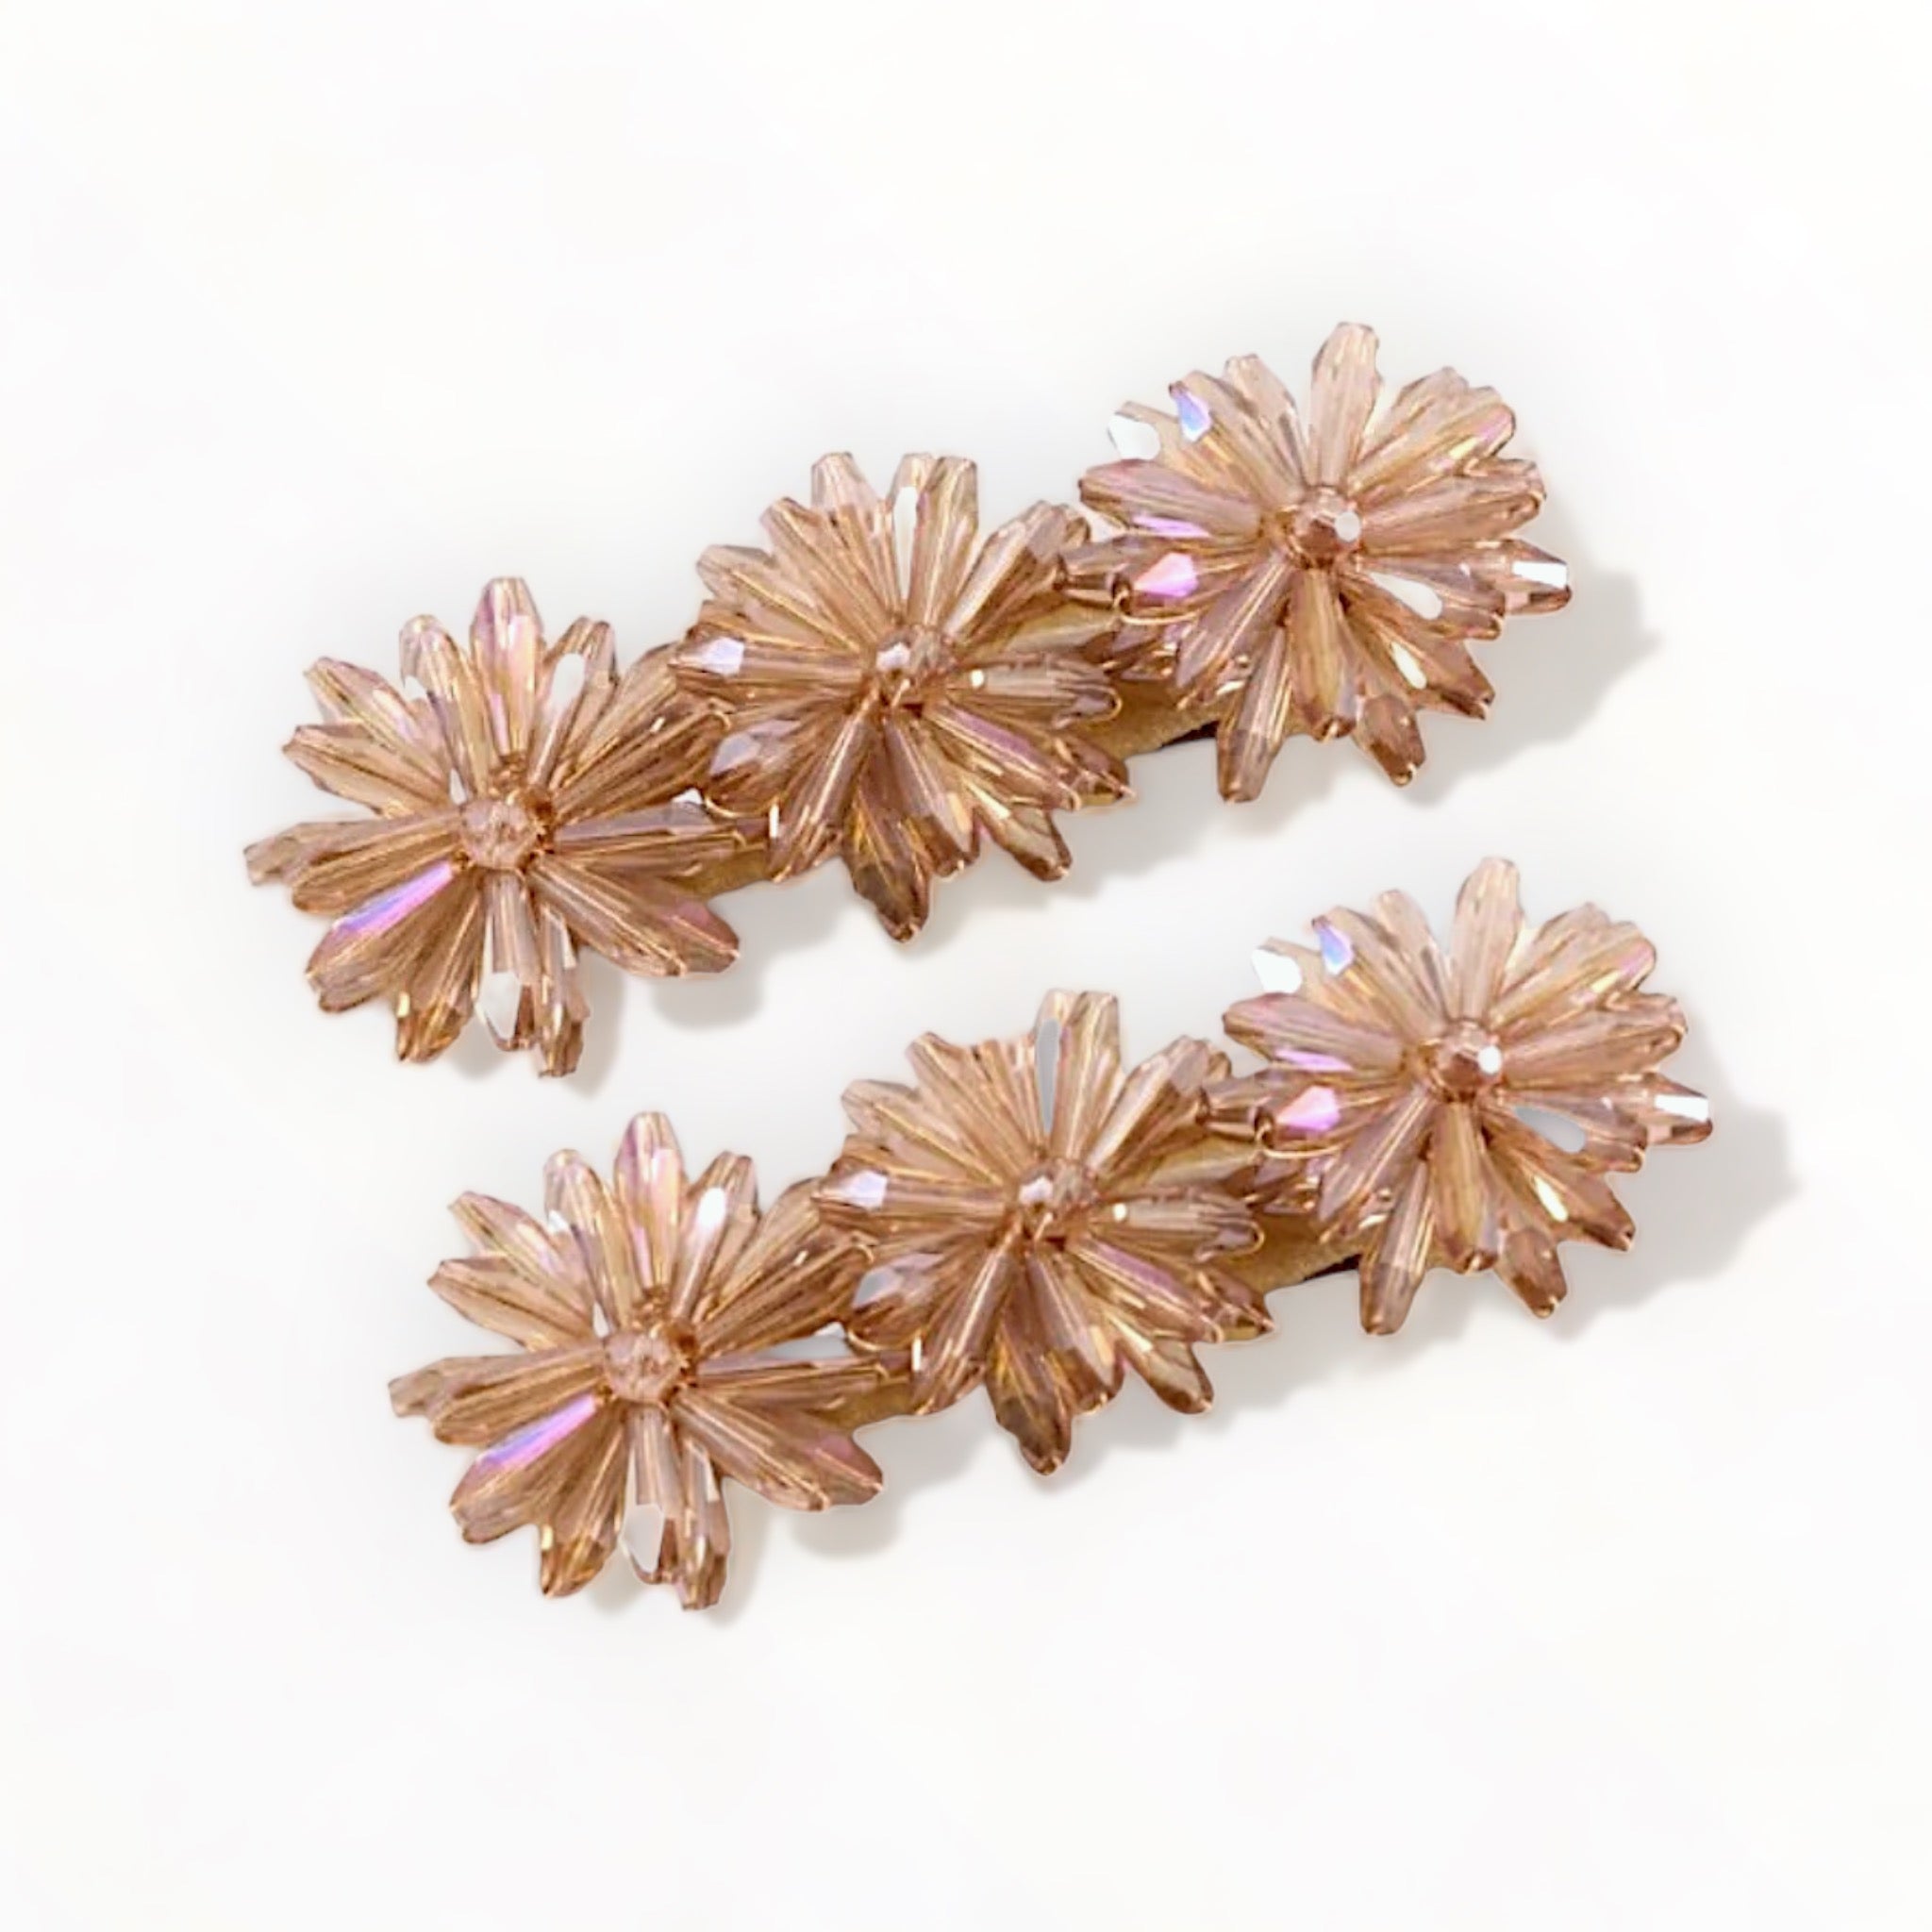 Designer crystal hair clip set - Sienna Likes to Party Accessories